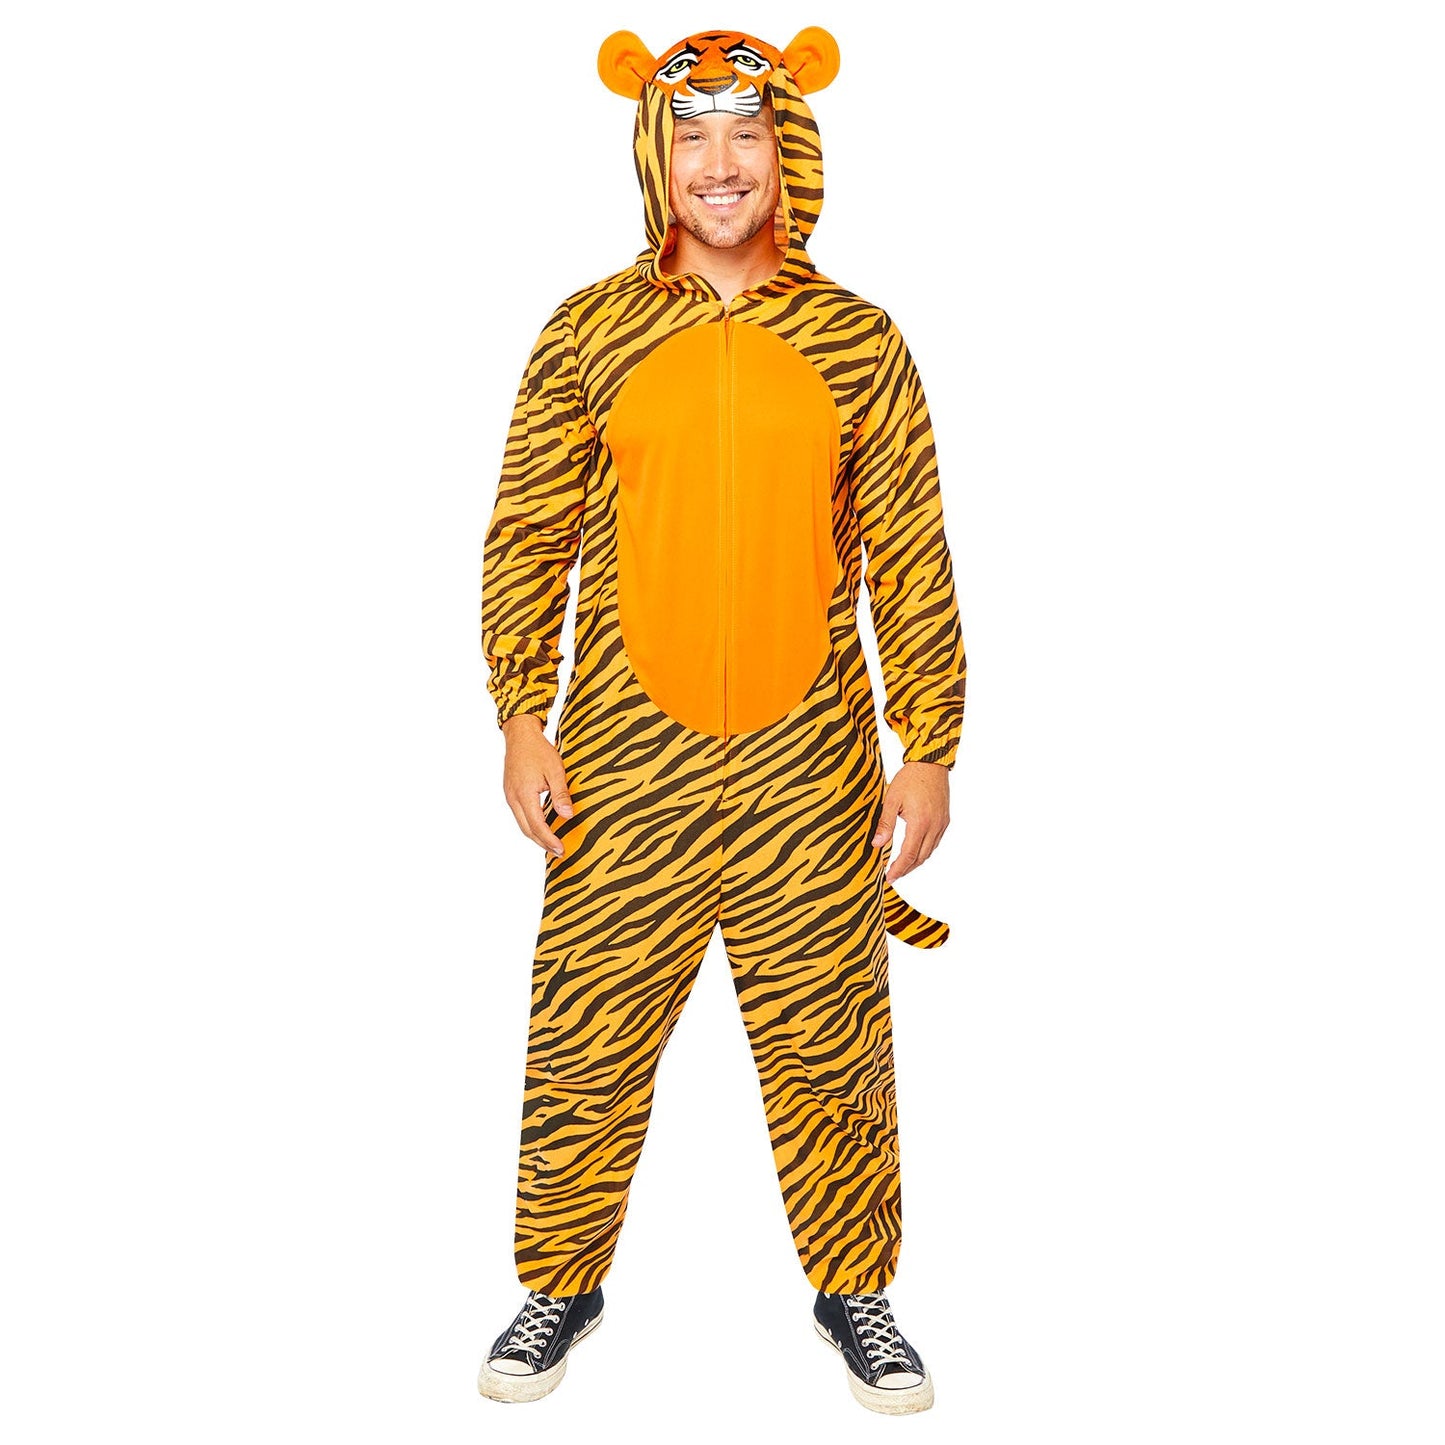 Adult Tiger Onesie Costume includes jumpsuit with hood